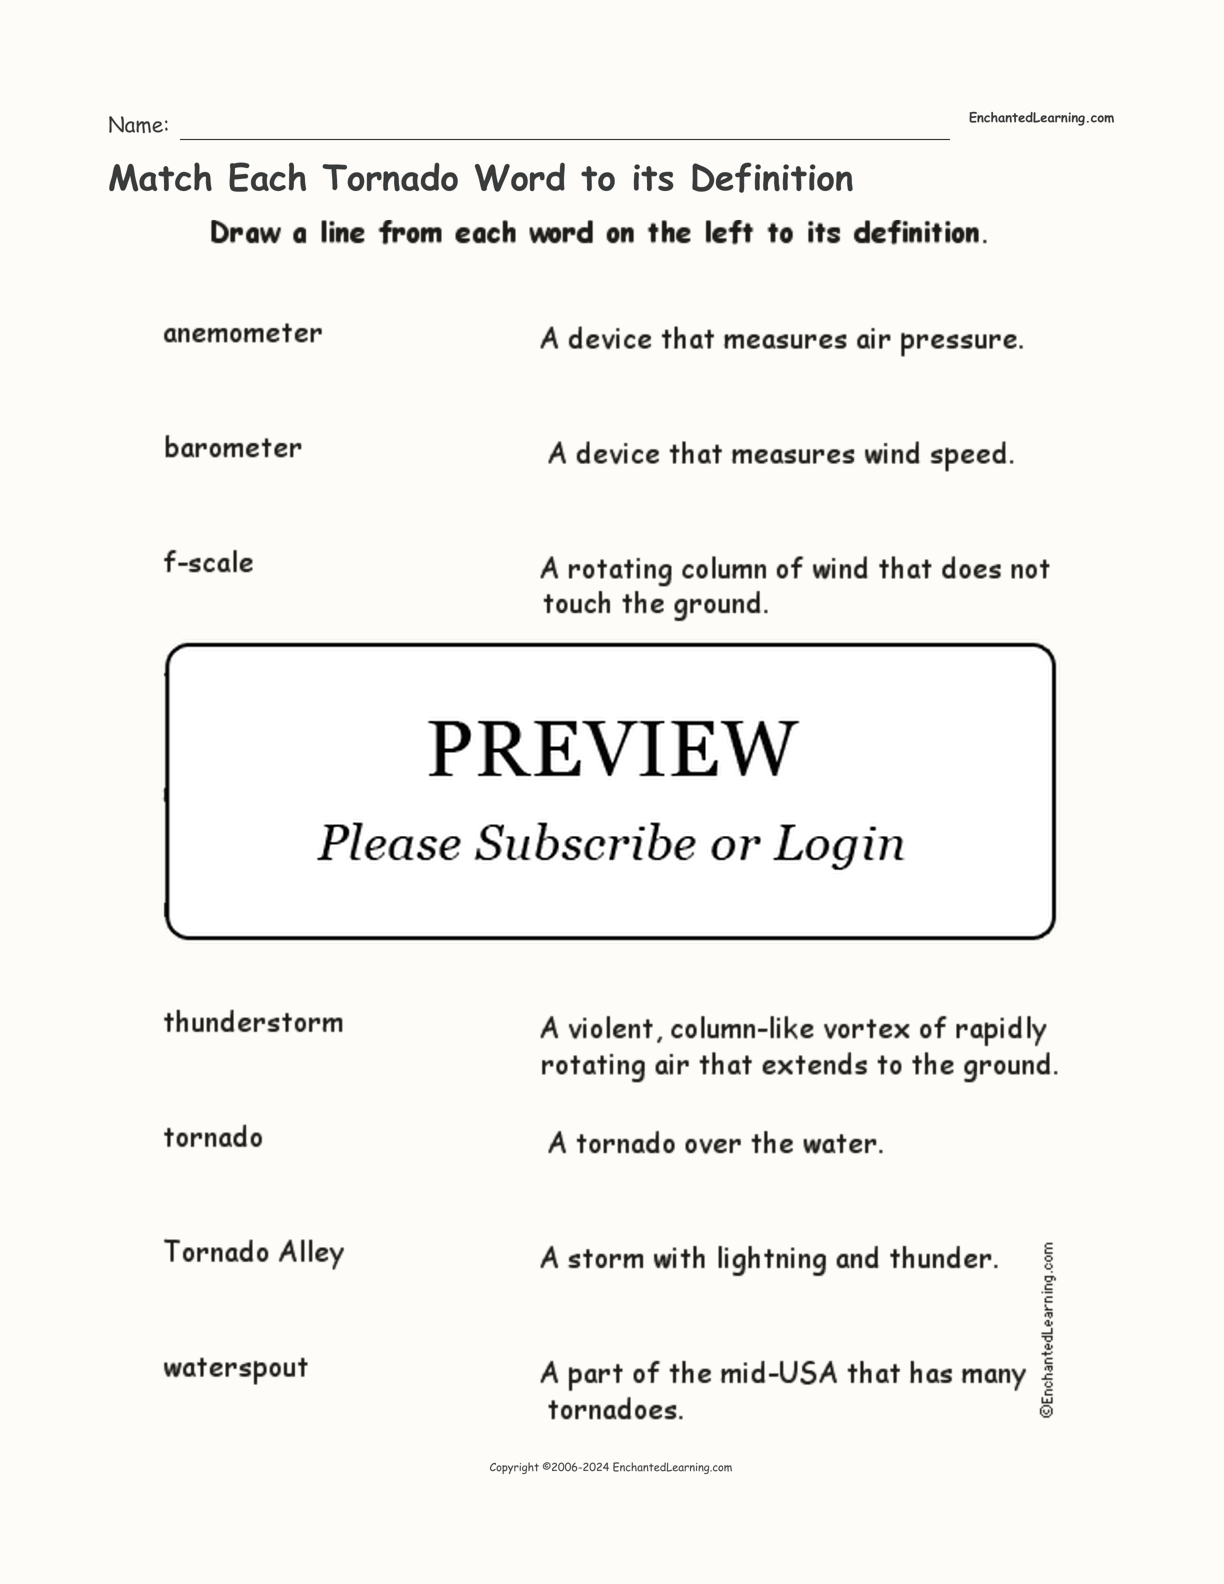 Match Each Tornado Word to its Definition interactive worksheet page 1